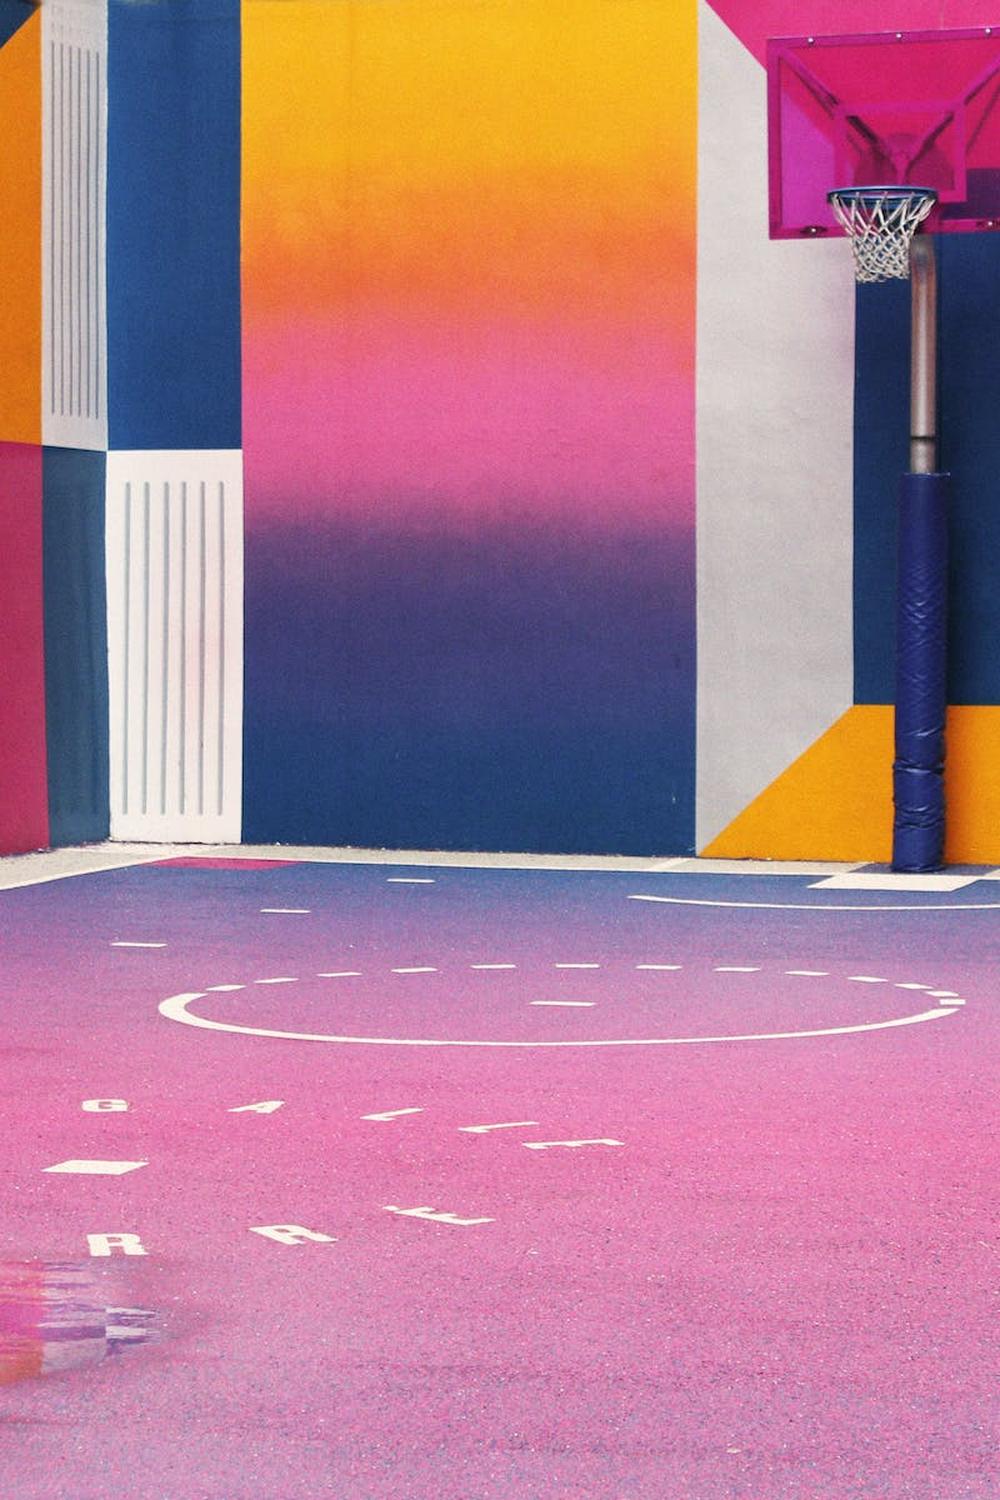 photo_of_multi_colored_basketball_court